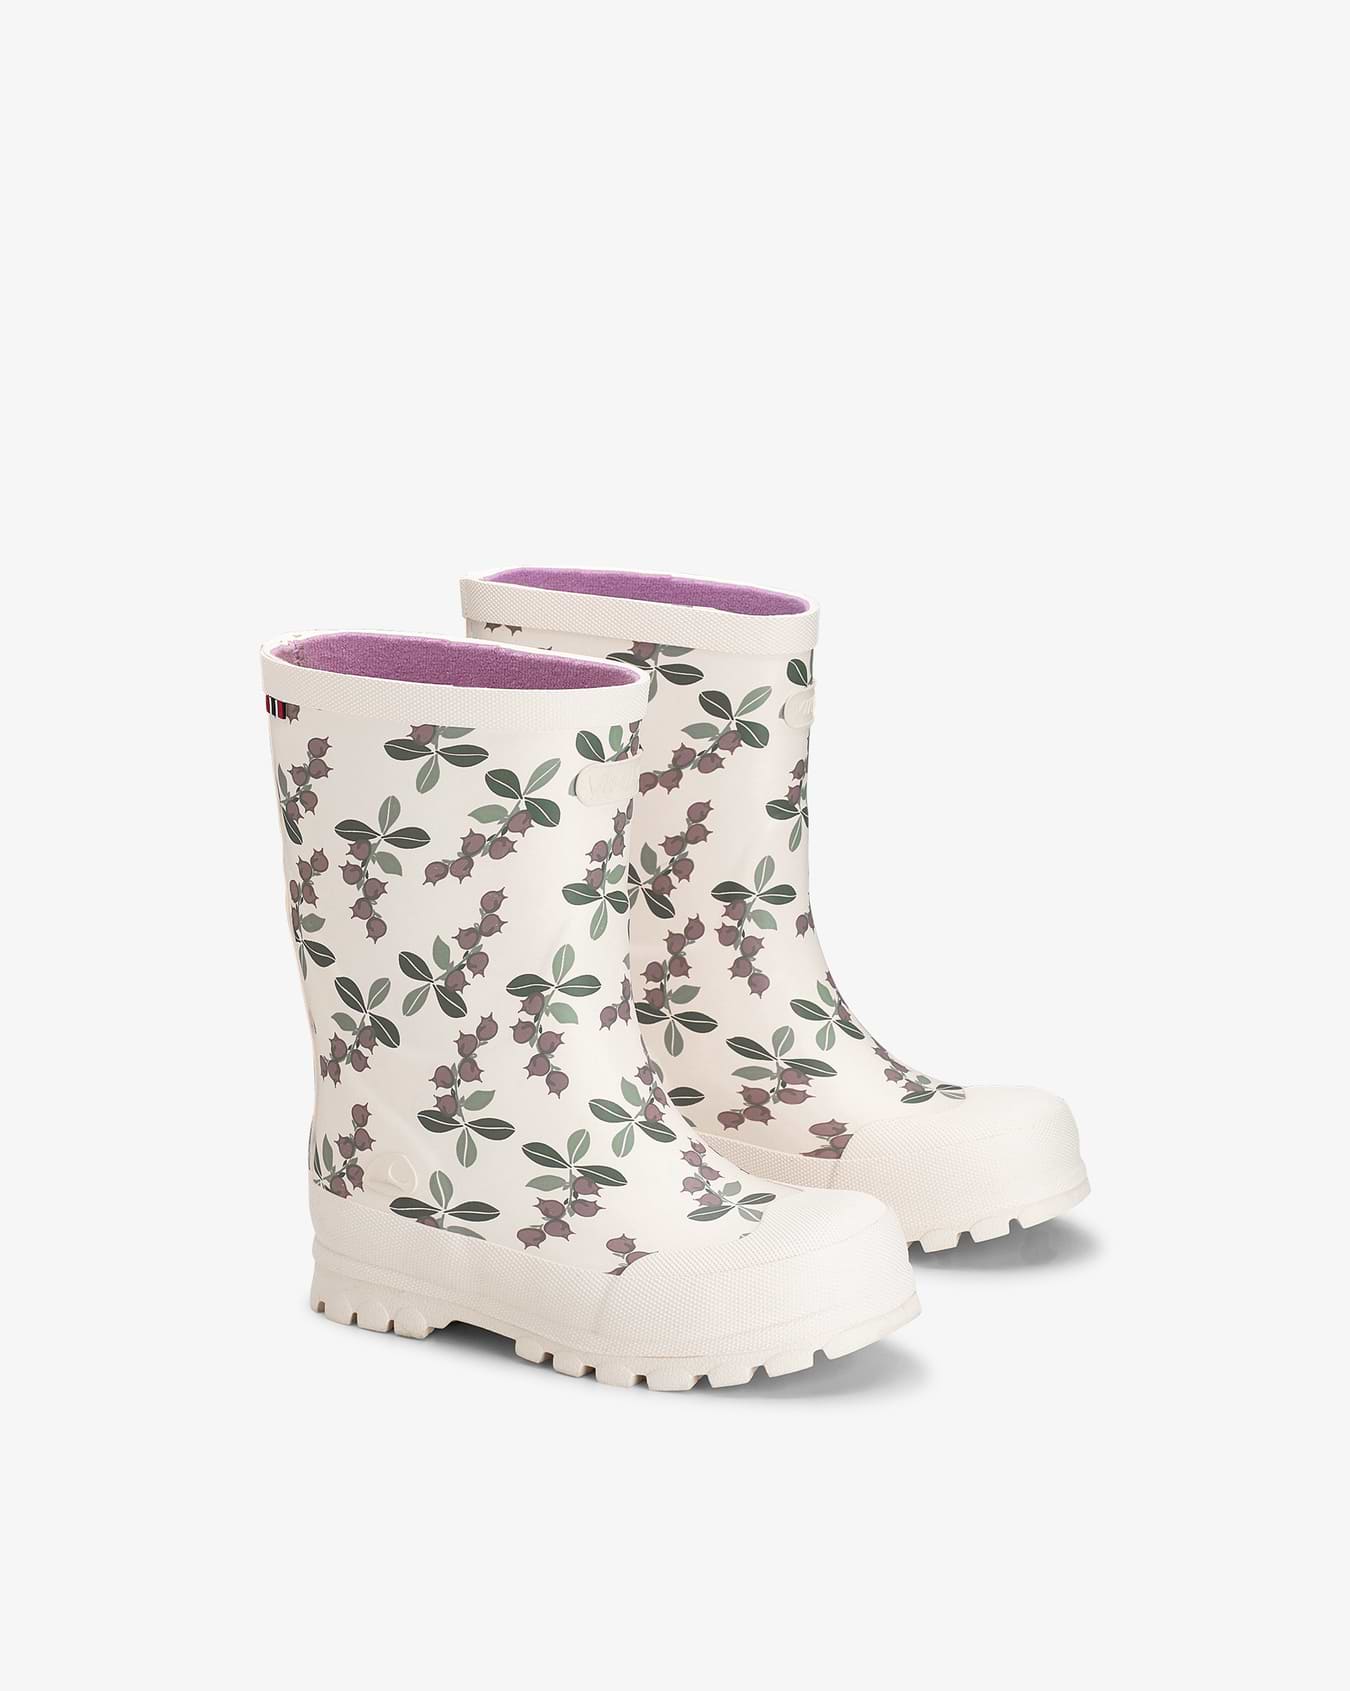 Jolly Print Light Pink/Olive Rubber Boot